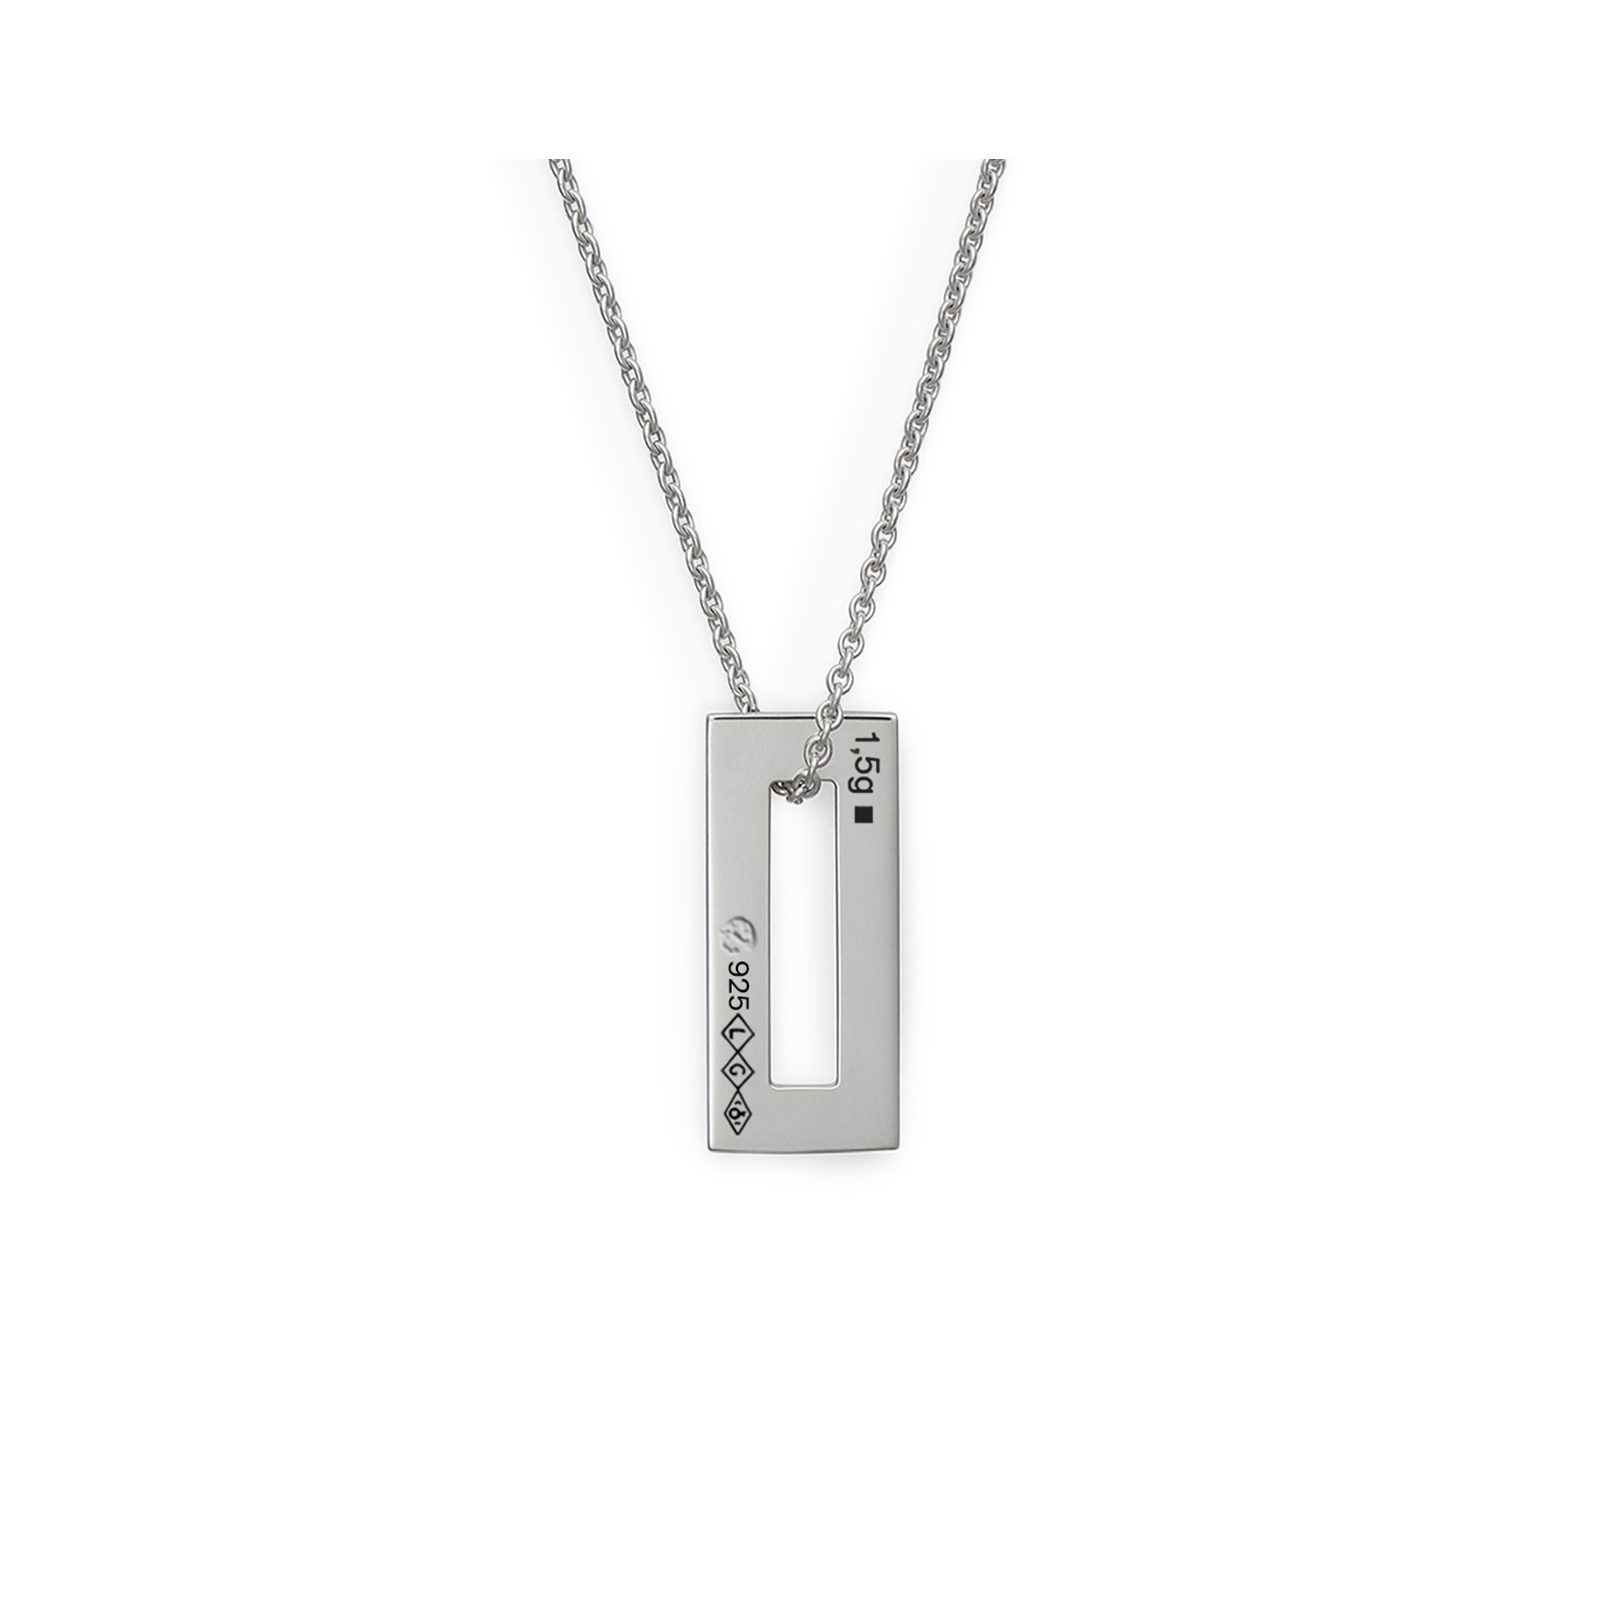 1,5g rectangle pendant with a chain